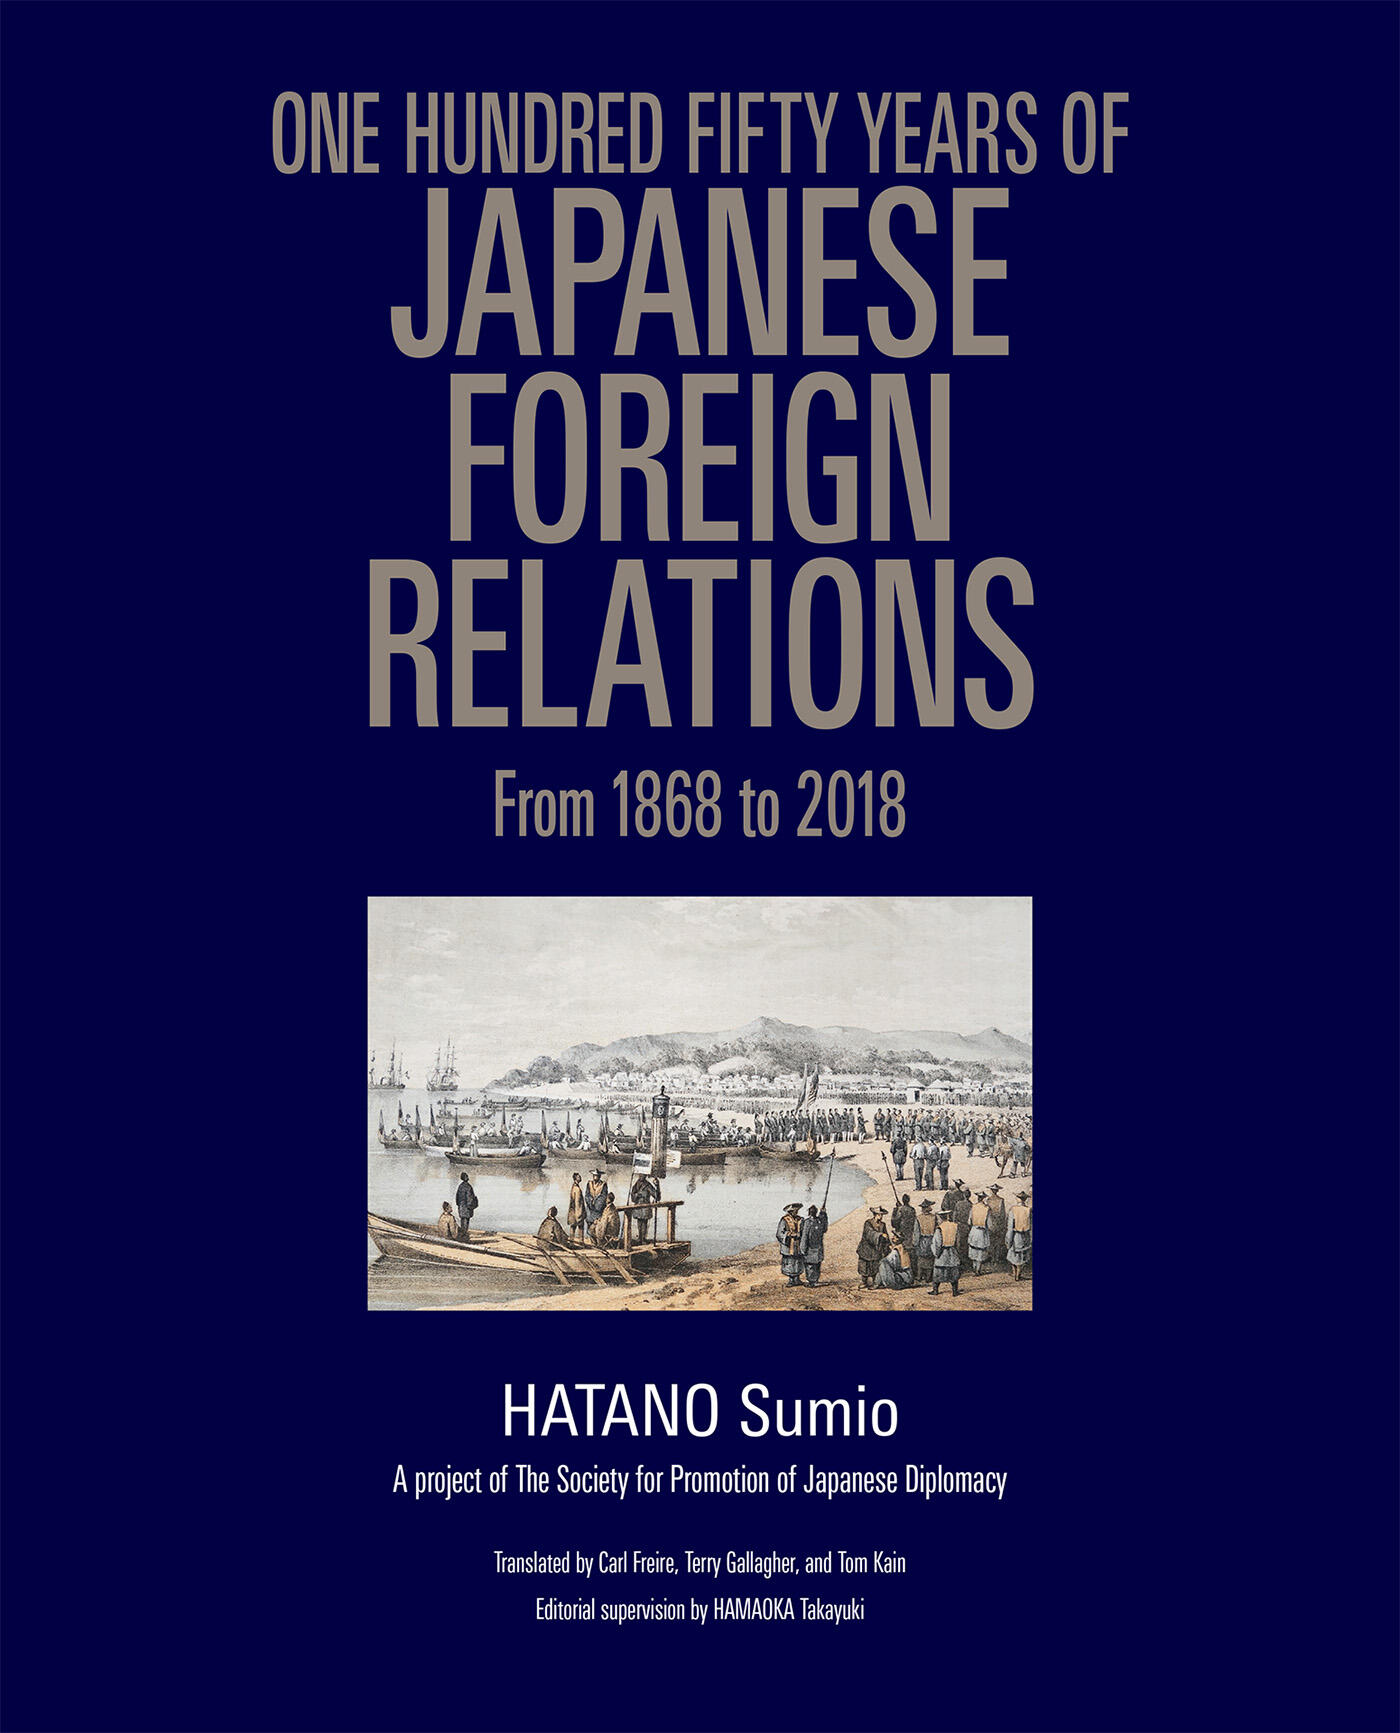 One Hundred Fifty Years of Japanese Foreign Relations